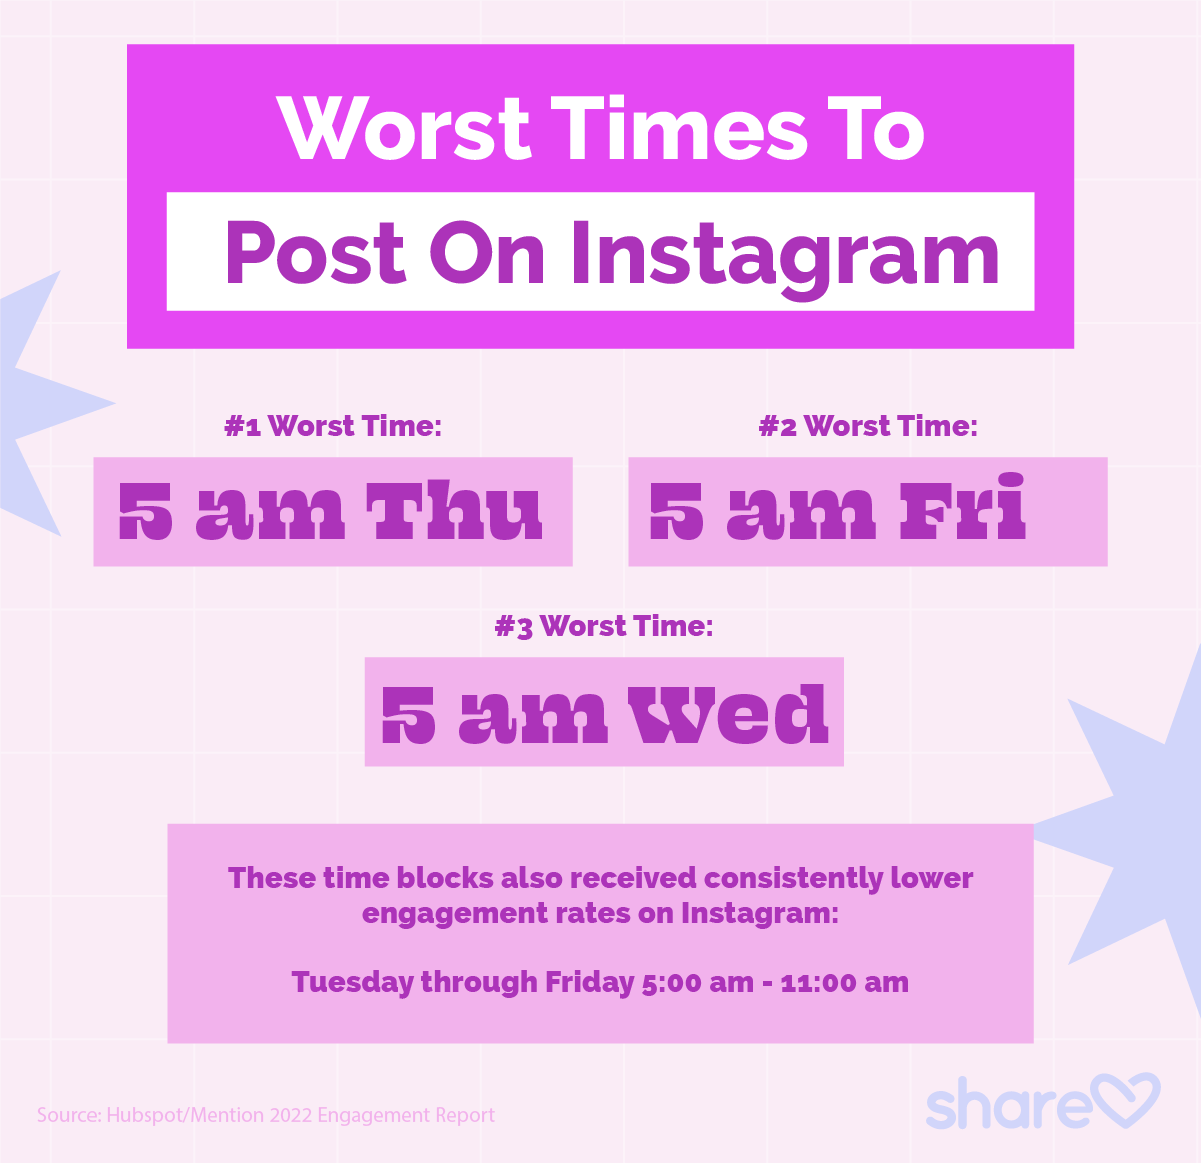 Worst Times To Post On Instagram